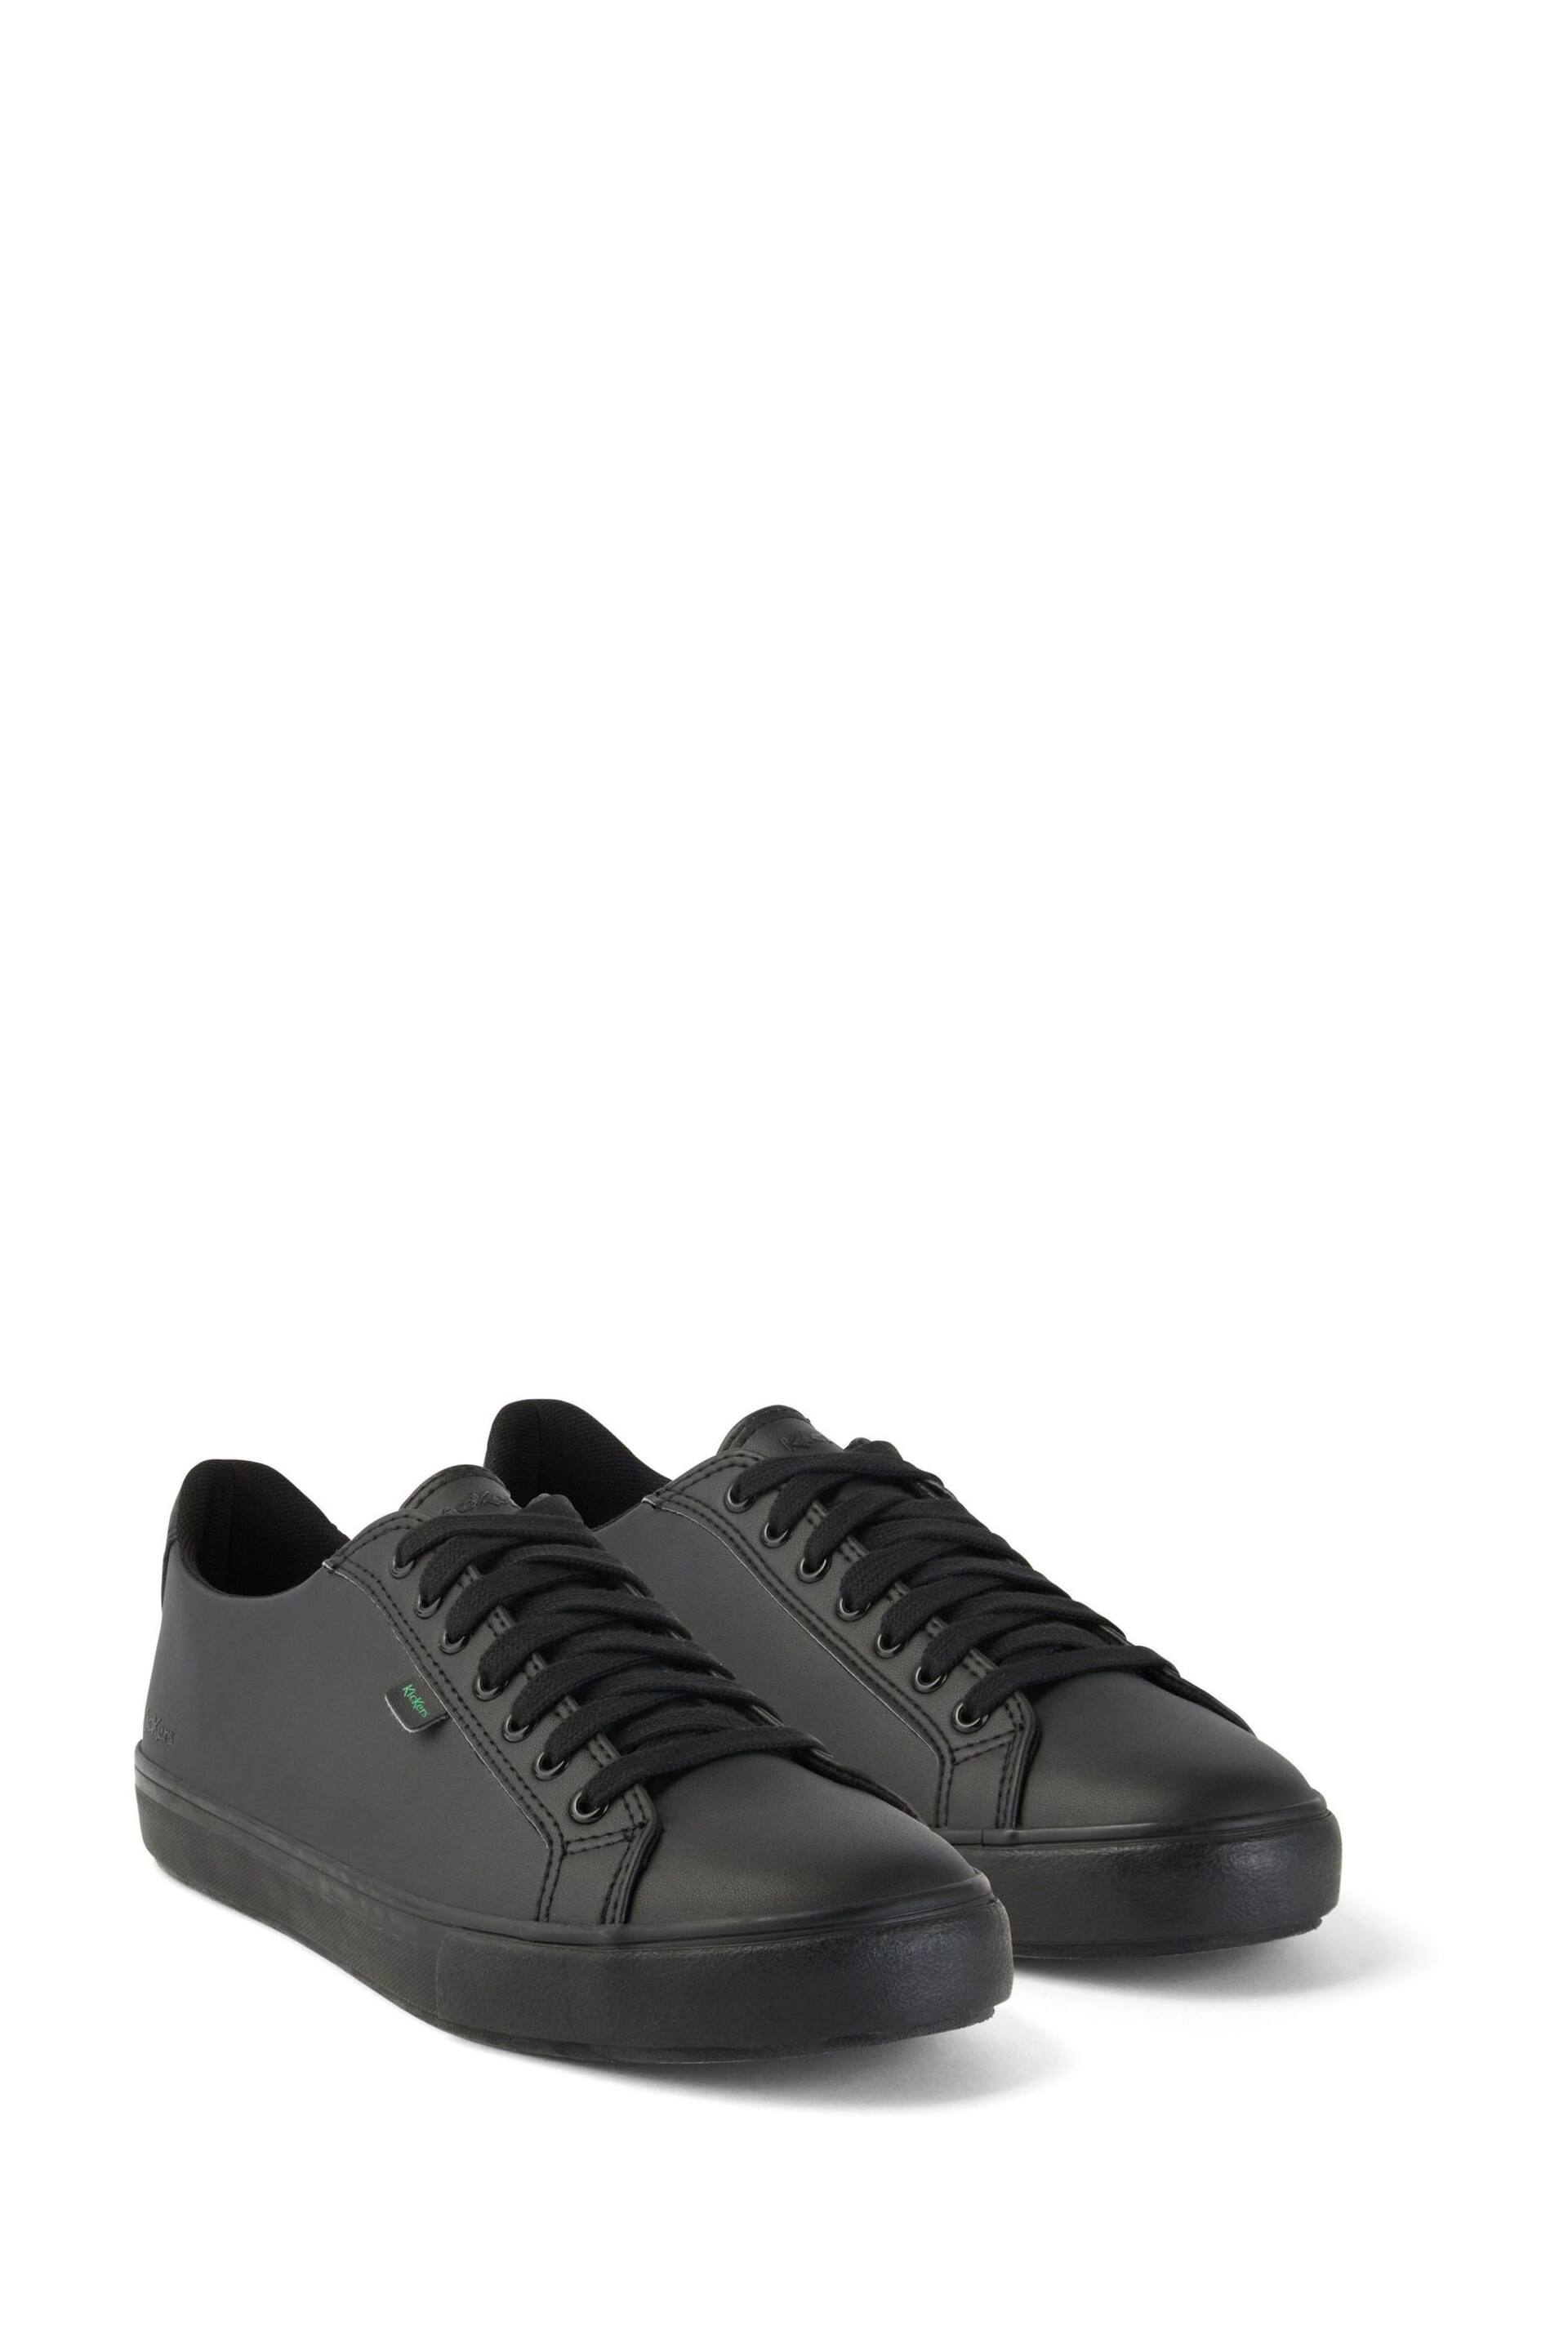 Kickers Black Vegan Tovni Lacer Trainers - Image 3 of 11